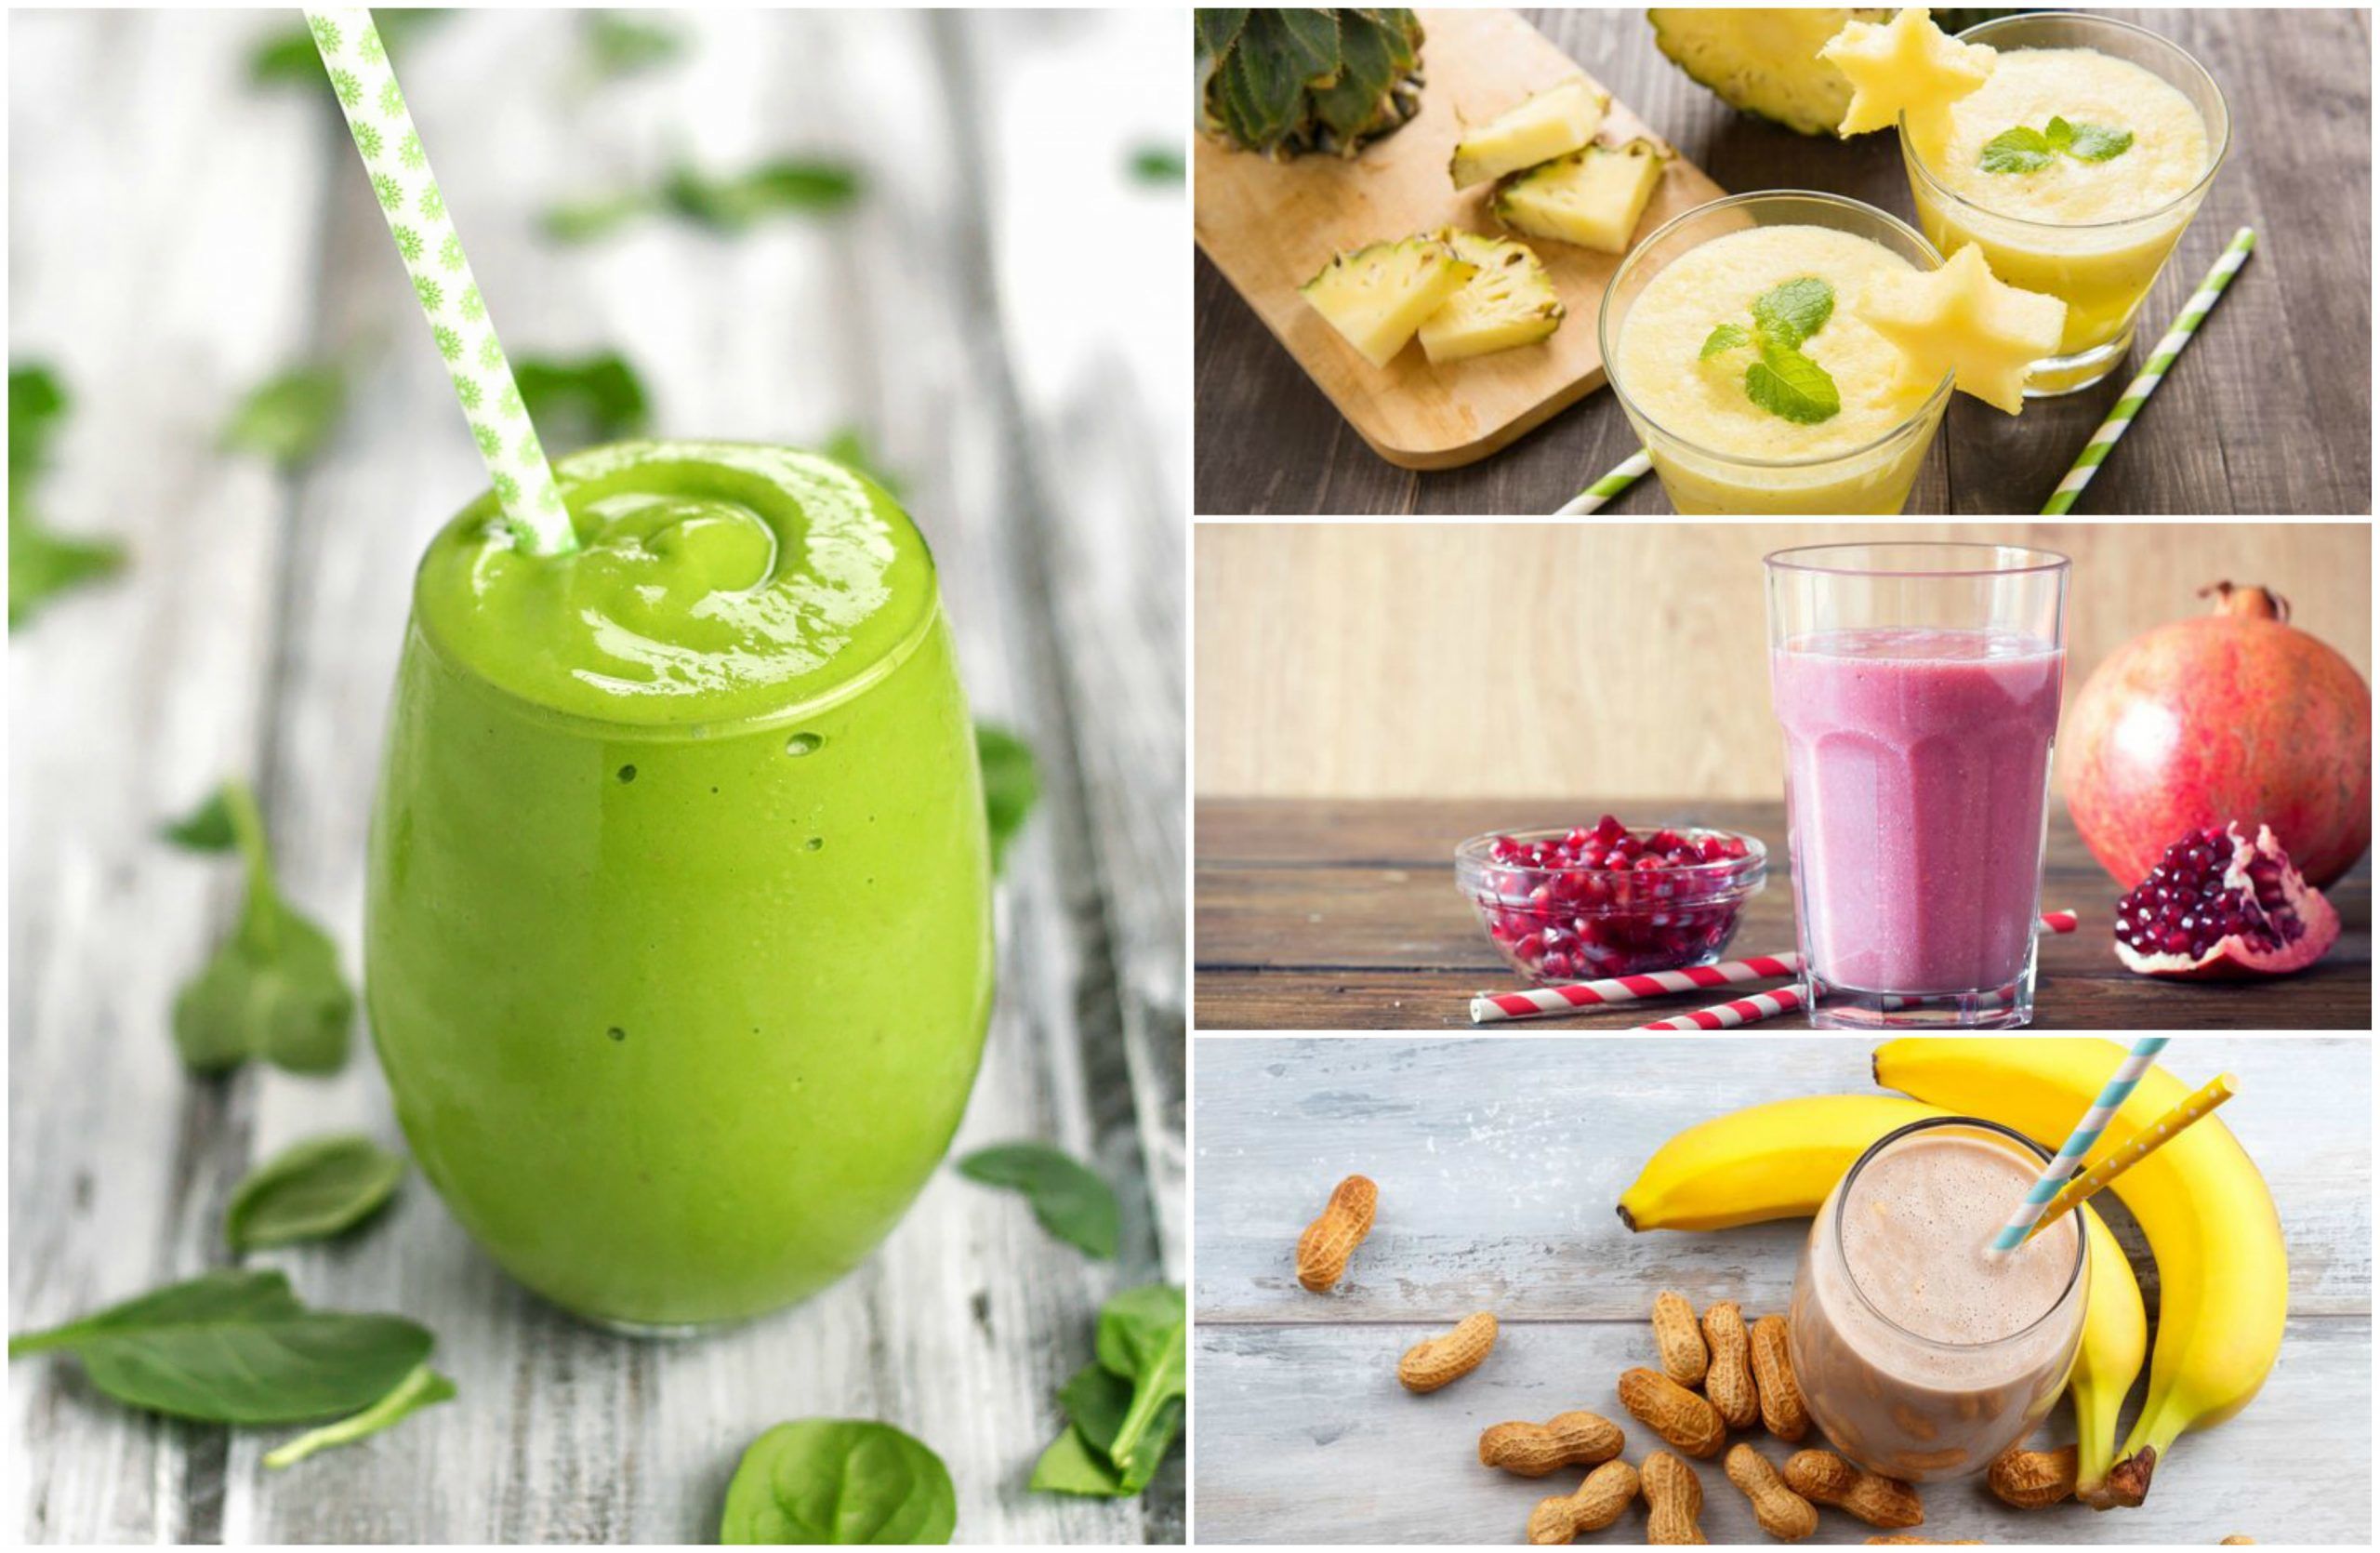 Healthy Smoothies Recipes To Start The Day With